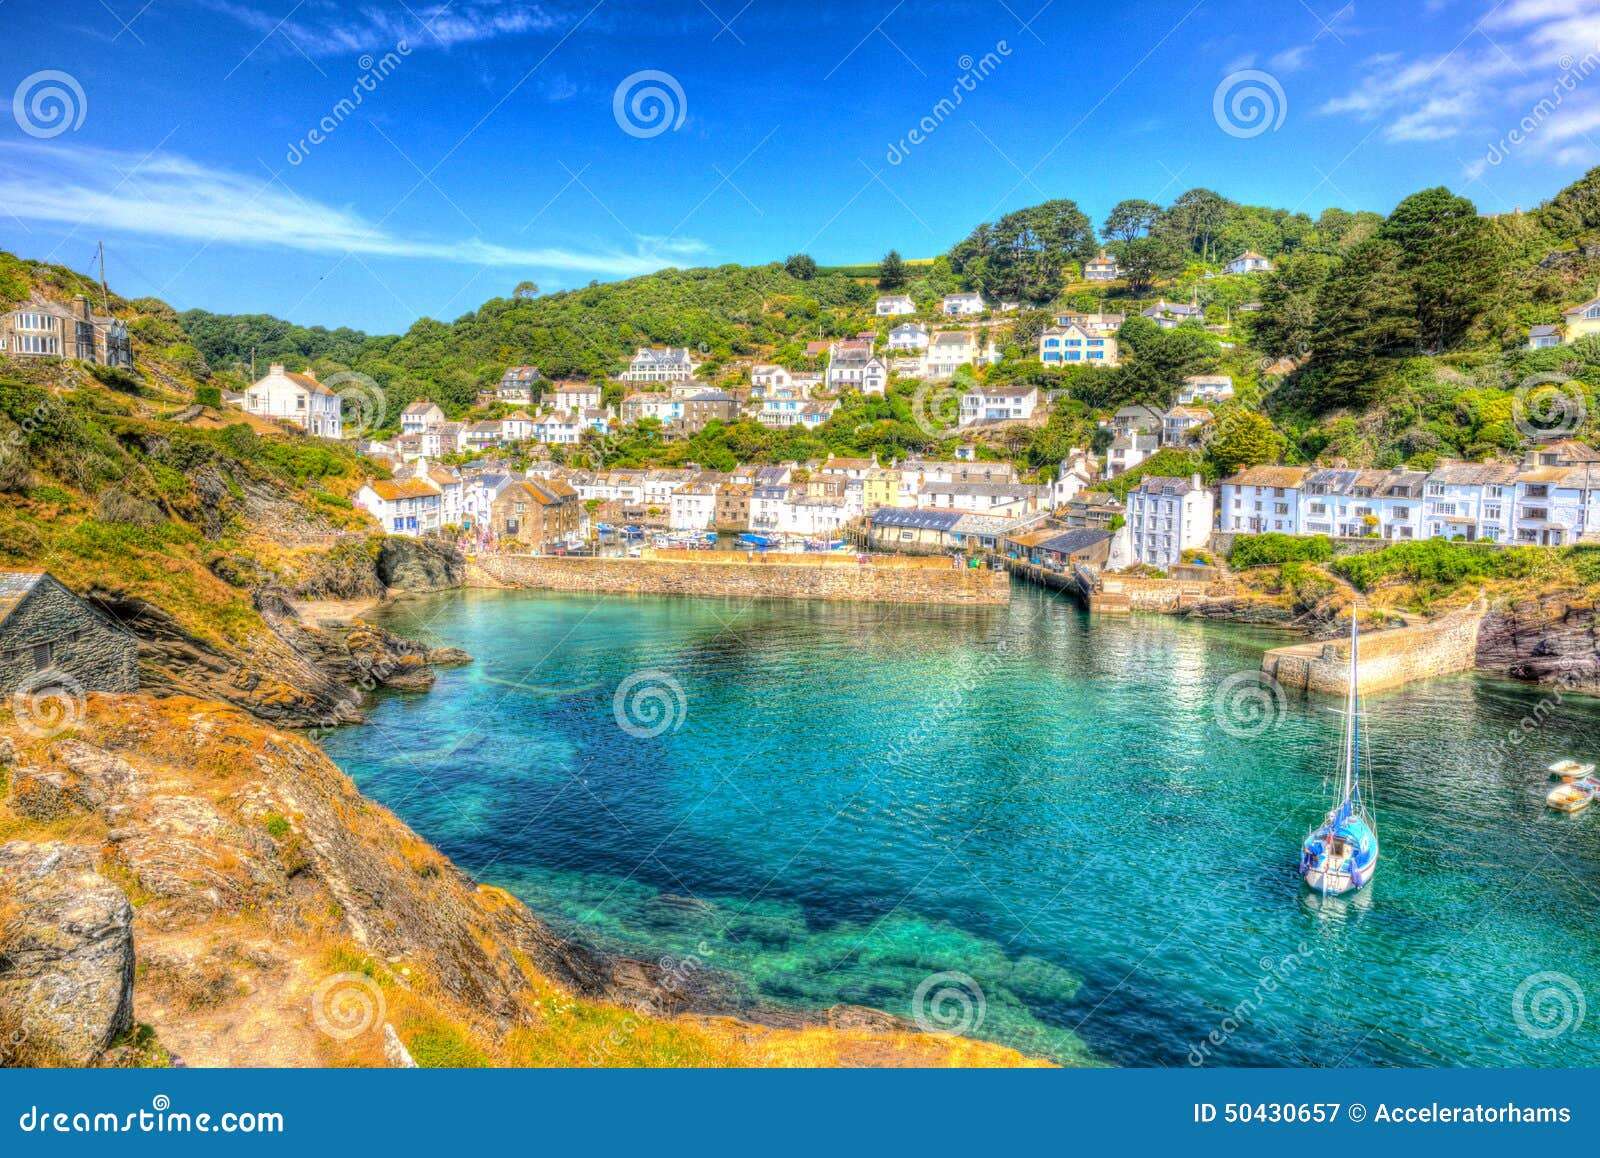 polperro cornwall england uk with clear blue and turquoise sea in vivid colour hdr like painting